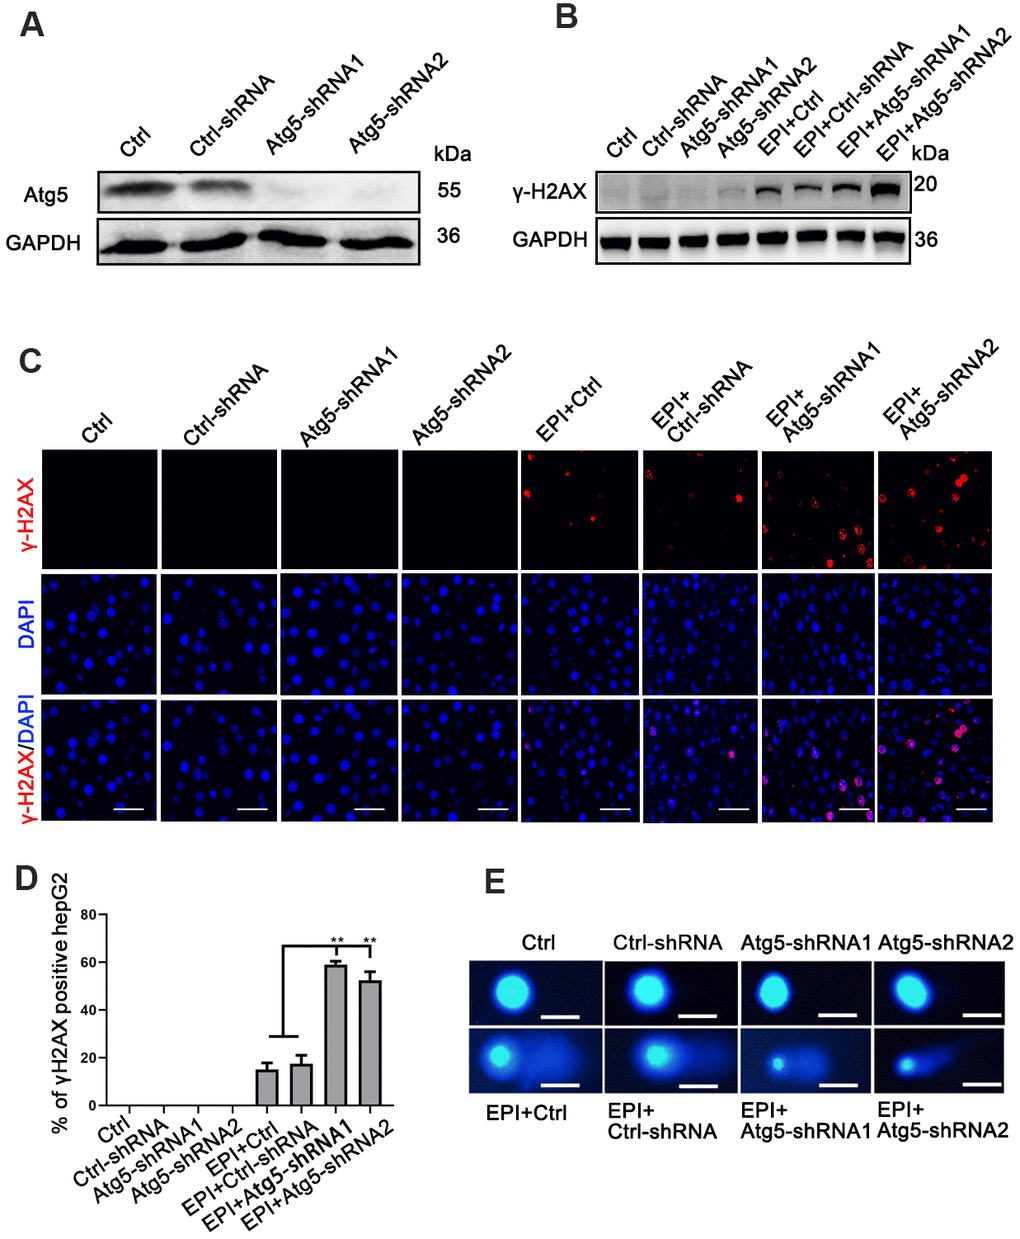 Loss of autophagy increases DNA damage. (A) Western analysis of Atg5 in cells infected with either Atg5-shRNA1/shRNA2 lentivirus or empty lentivirus control vector; GAPDH was used as a loading control. (B) Western analysis of γ-H2AX protein levels in epirubicin-treated (2 μM; 24 h) cells. (C) Accumulation of γ-H2AX analyzed by immunofluorescence as foci formation in epirubicin (4 μM; 6 h) treated cells (scale bar, 100μm). (D) Quantification of γ-H2AX+ cells. Data are expressed as mean±SD. ** P≤0.01. (E) Wild-type, vector control, and sh-Atg5 cells were treated with 4 μM epirubicin for 12 h, then cells were analyzed by comet assay (scale bar, 20μm).